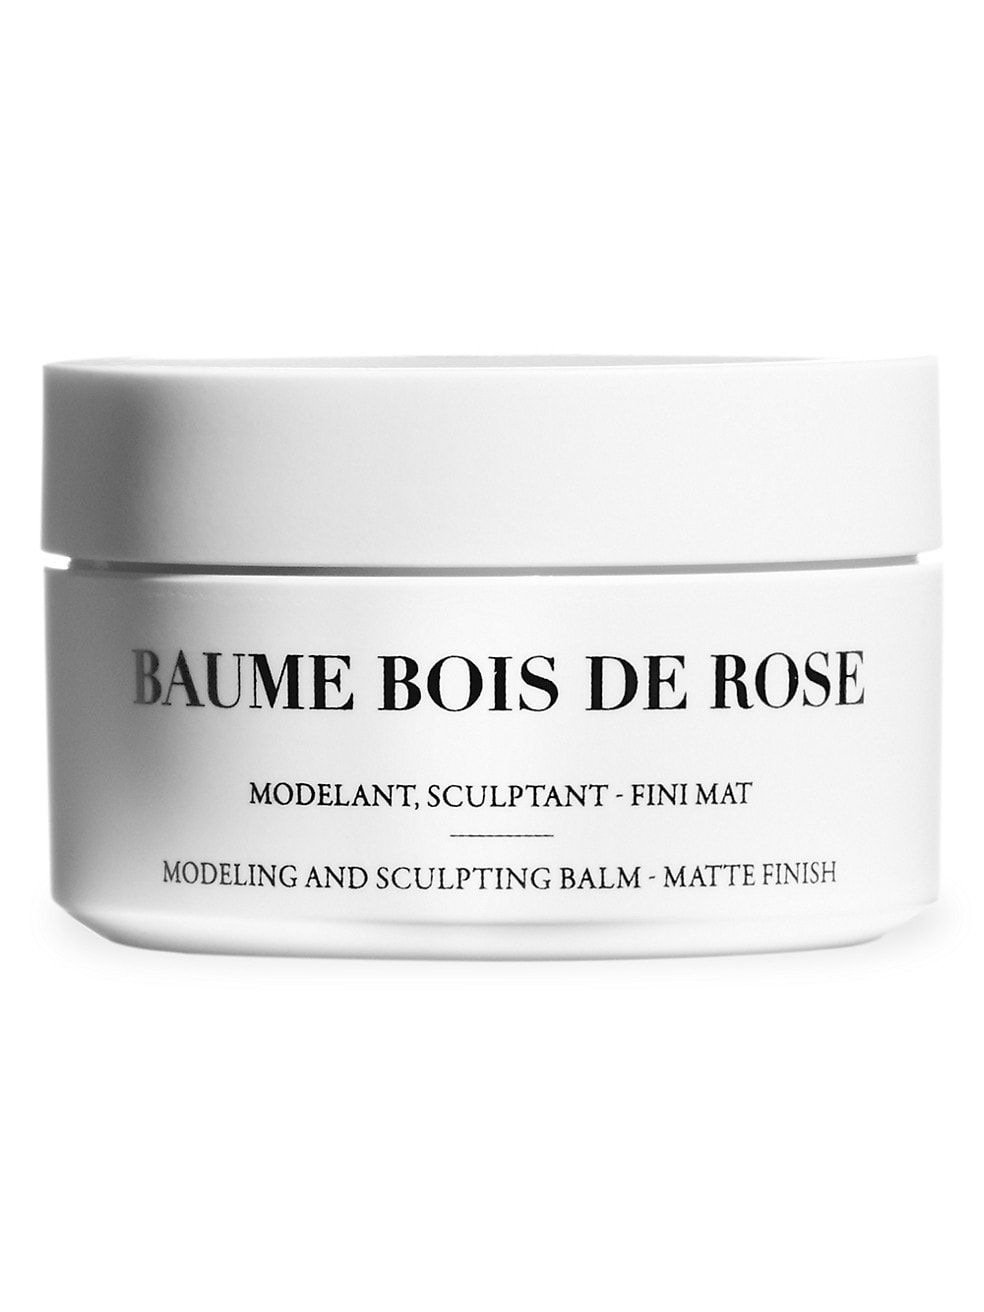 Matte Finish Balm for Shaping & Sculpting Hair